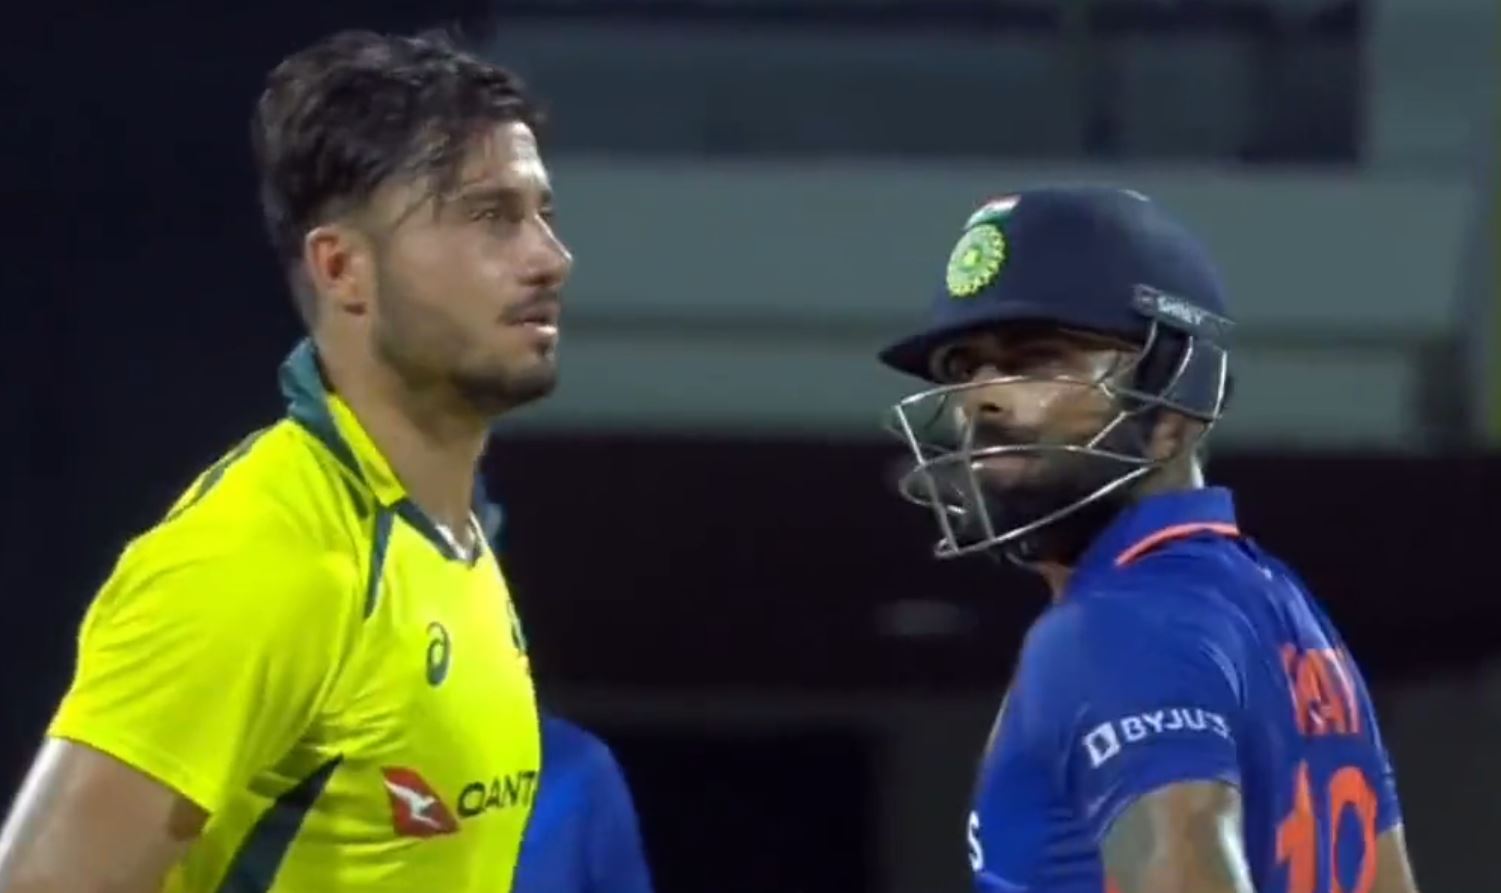 Virat Kohli and Marcus Stoinis had a moment during the 3rd ODI | Twitter